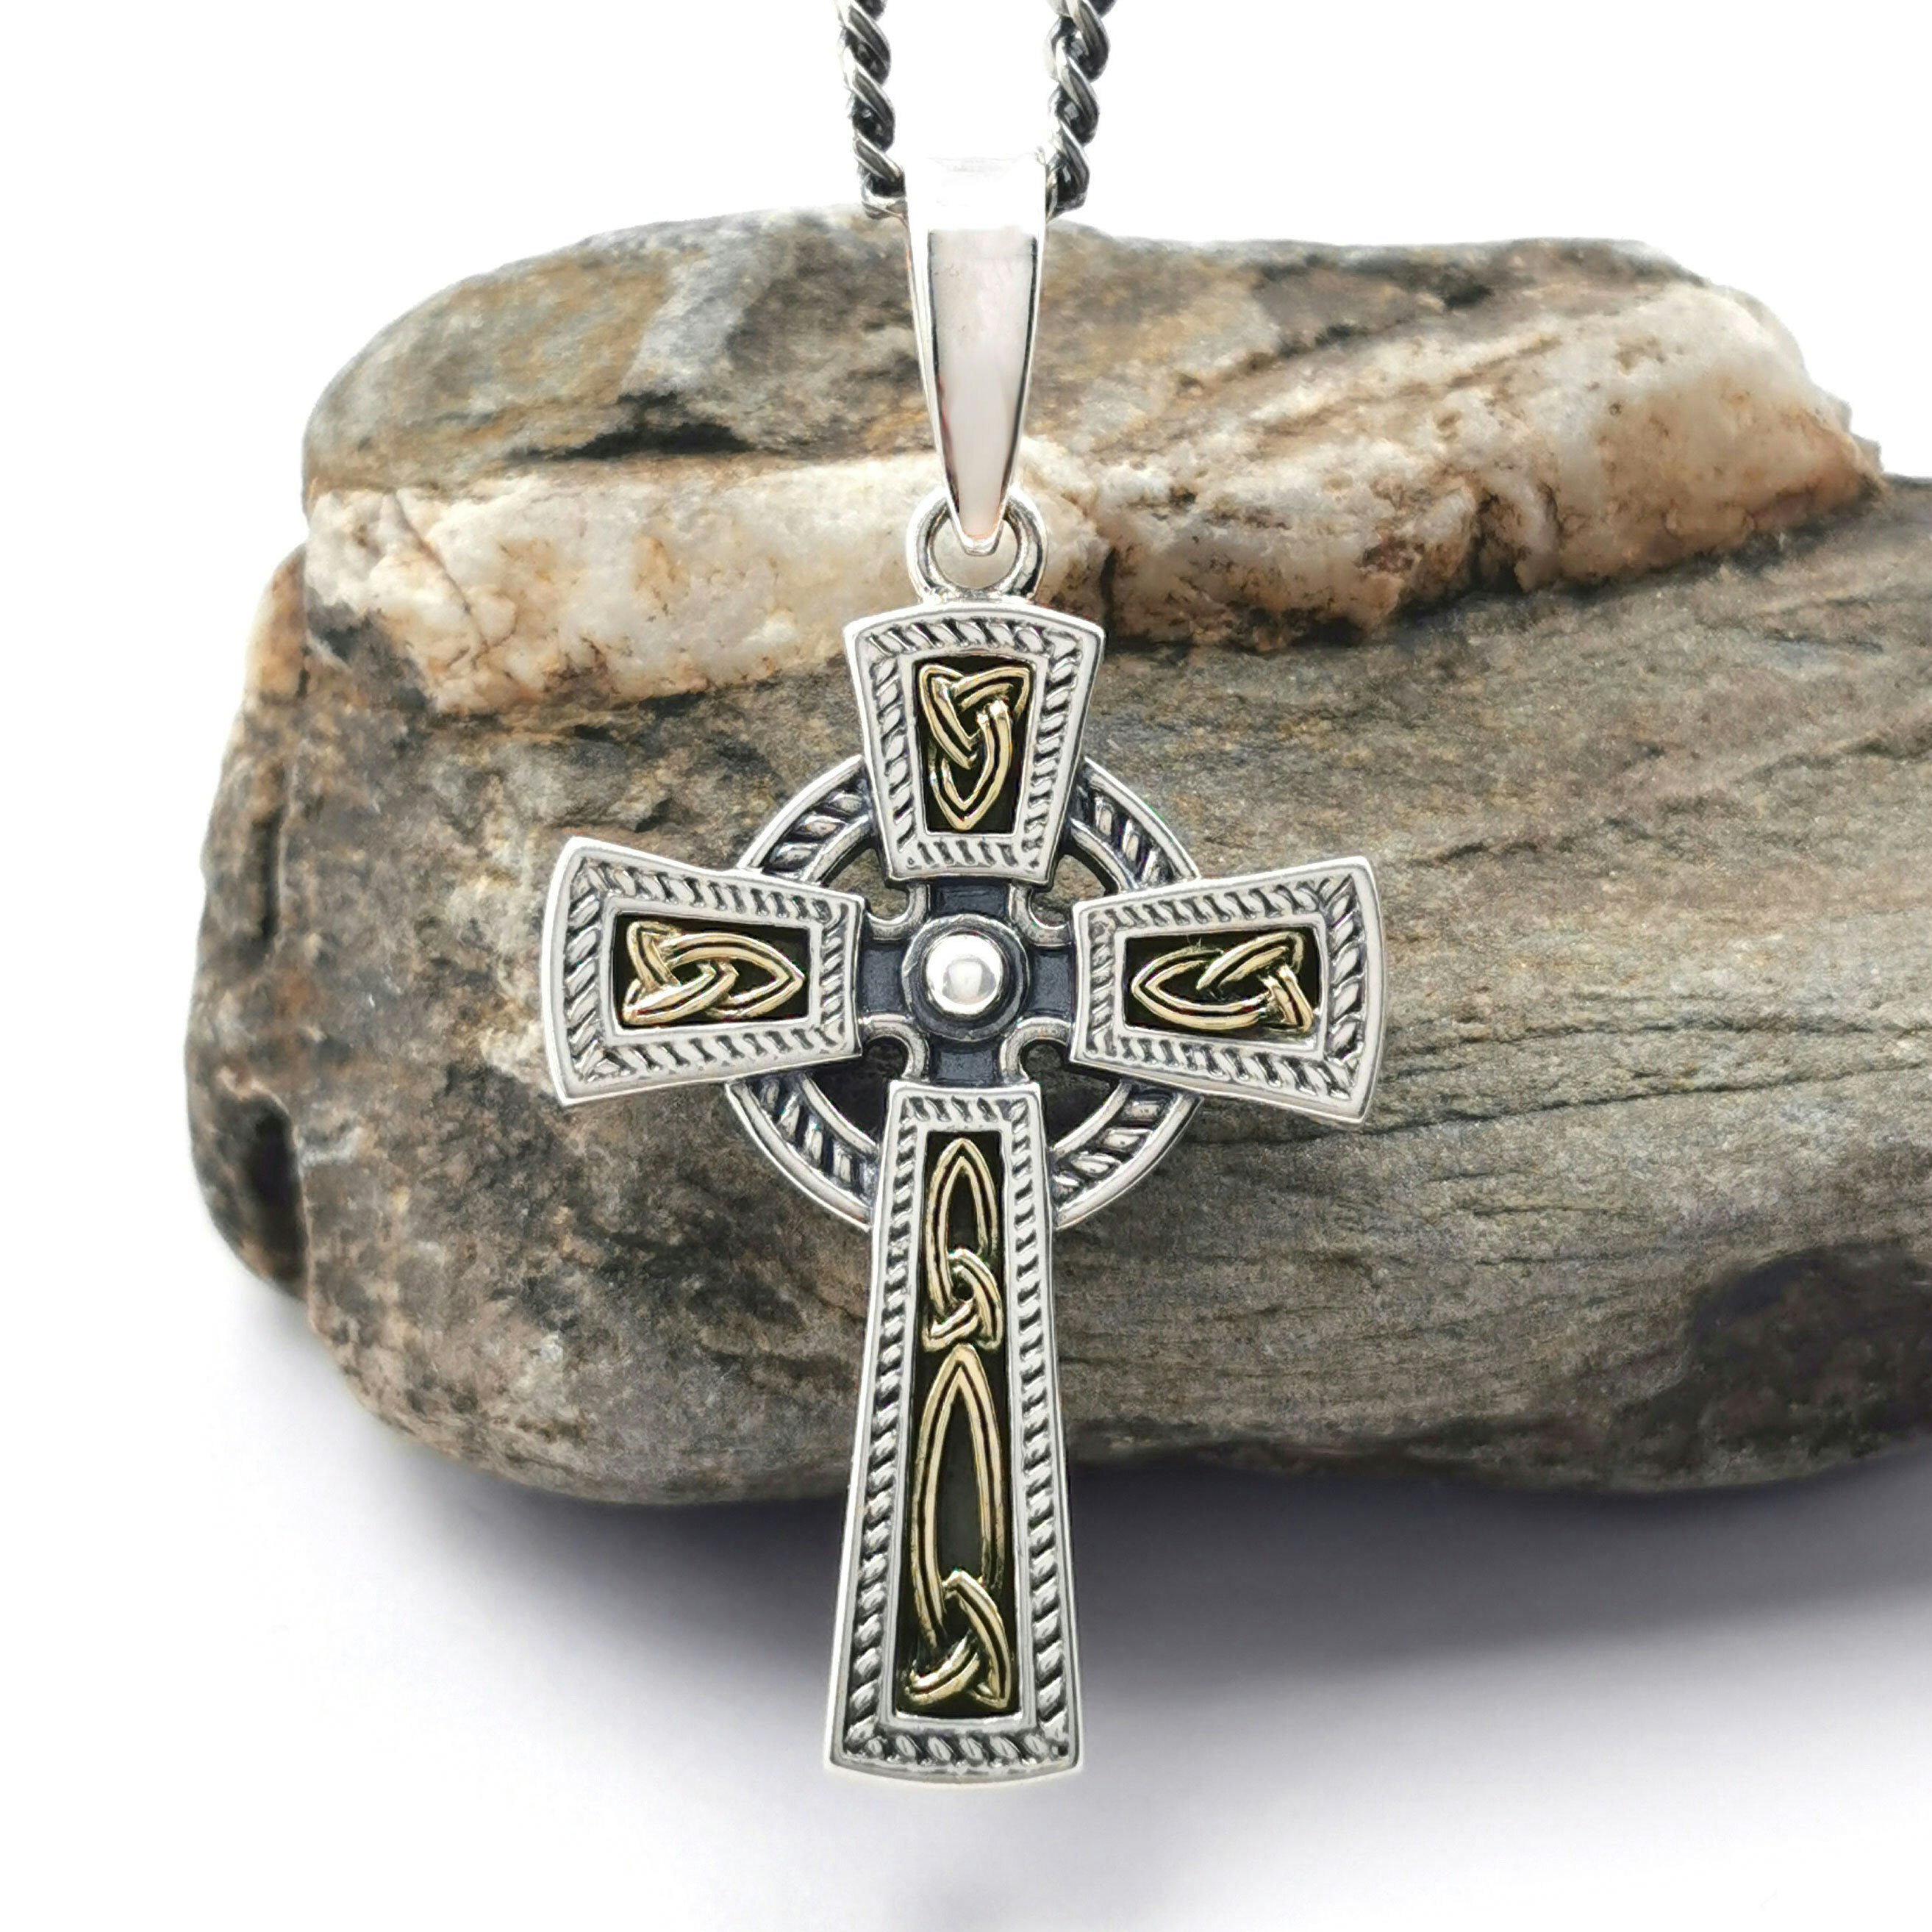 14kt Gold Filled Celtic Cross Pendant with 24 Gold Plated Stainless Steel Heavy Curb Chain. 